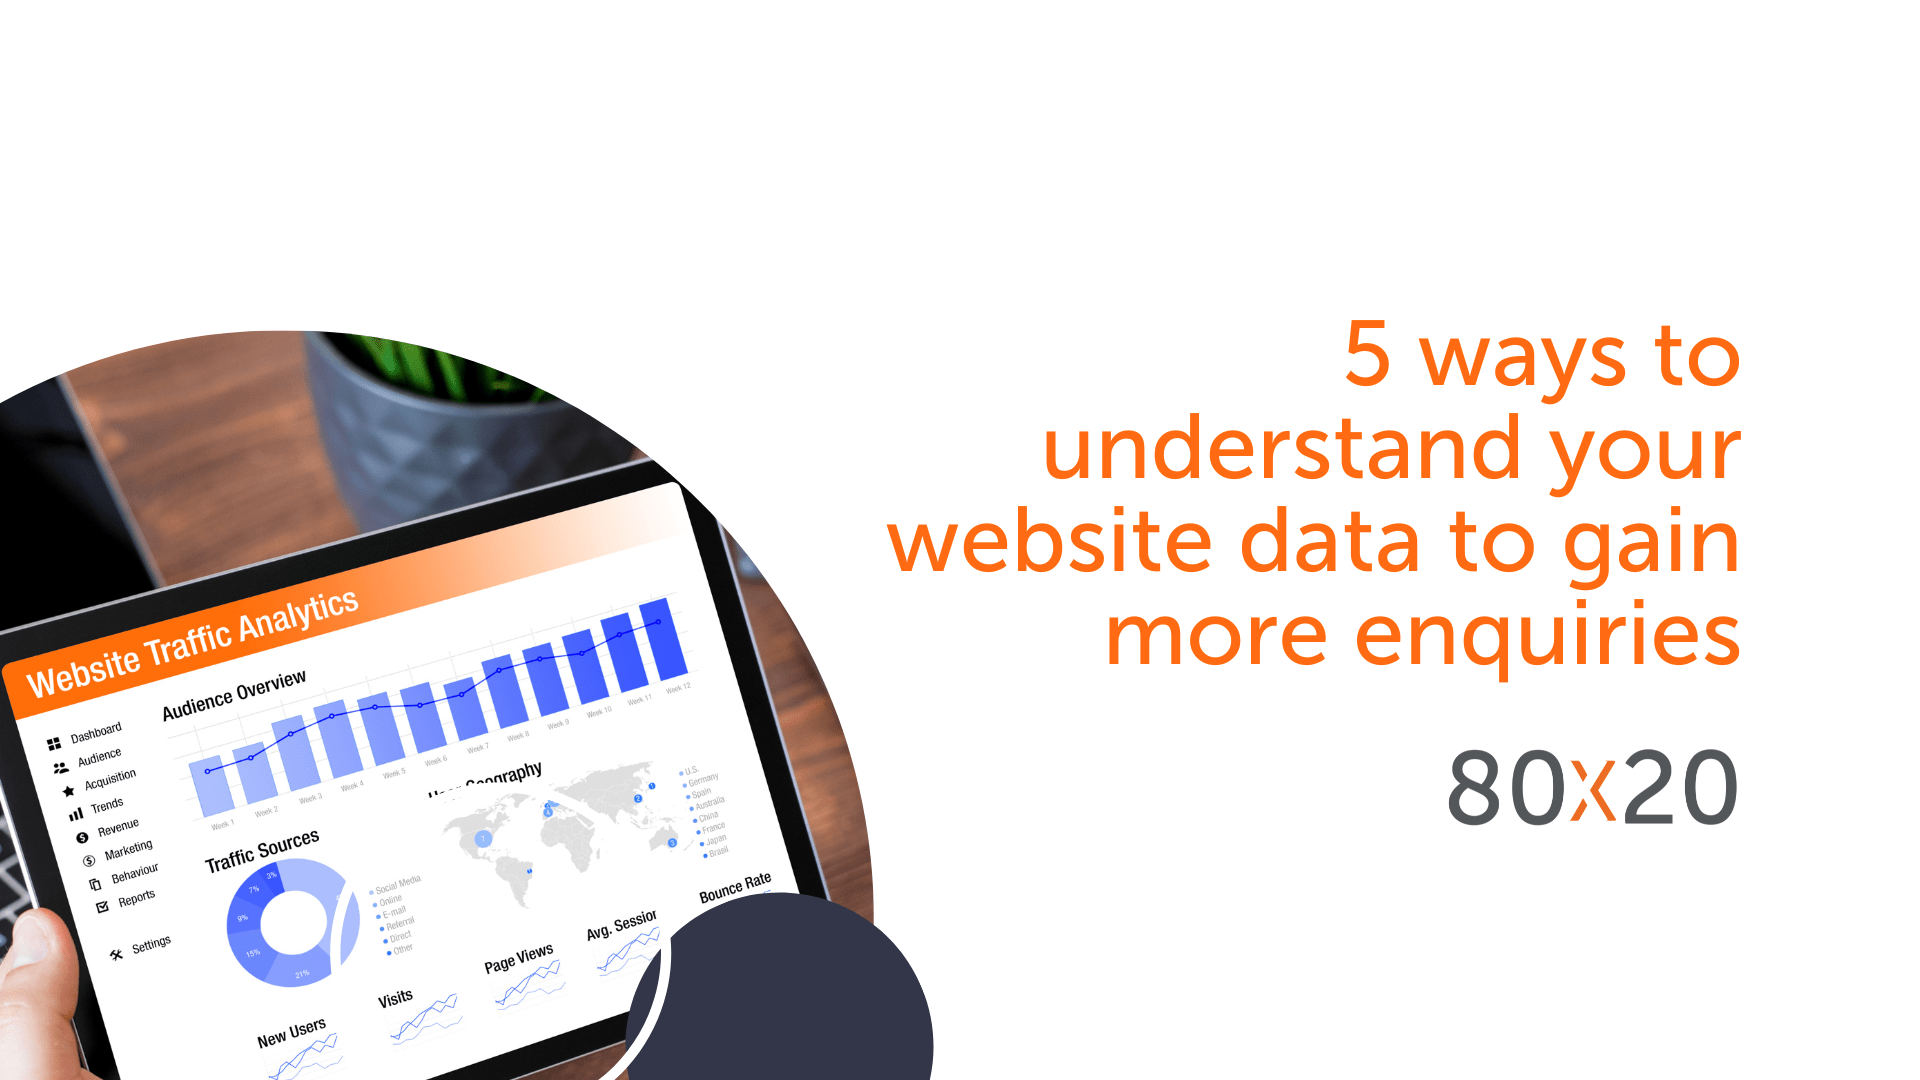 Five ways to understand your website data to gain more enquires - 80x20